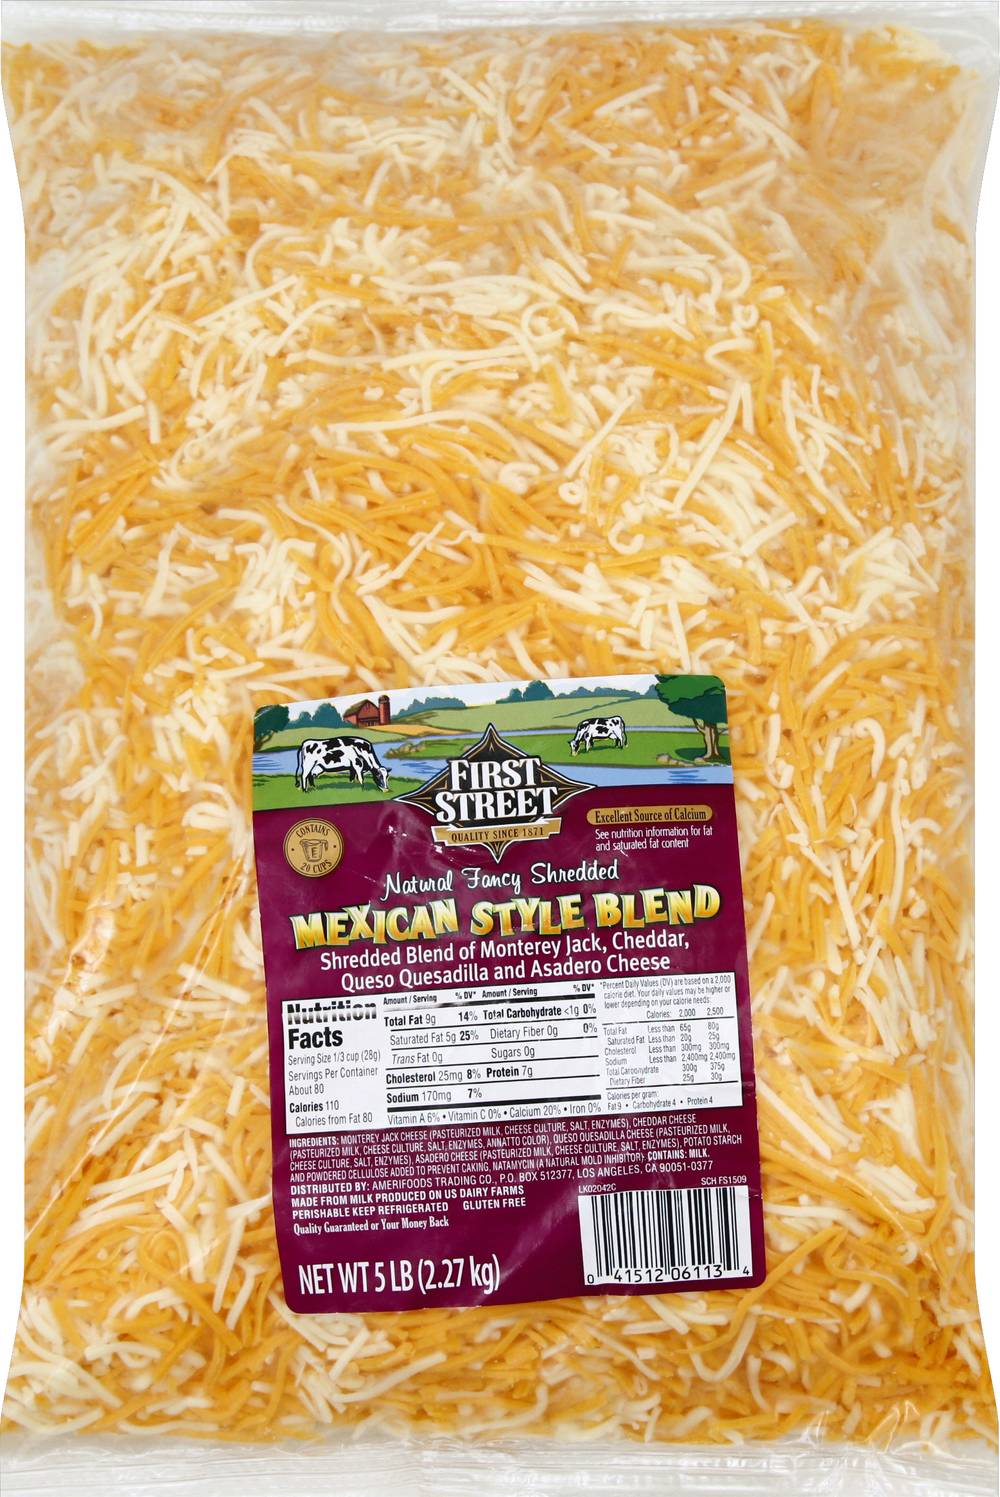 First Street Shredded Mexican Blend Cheese